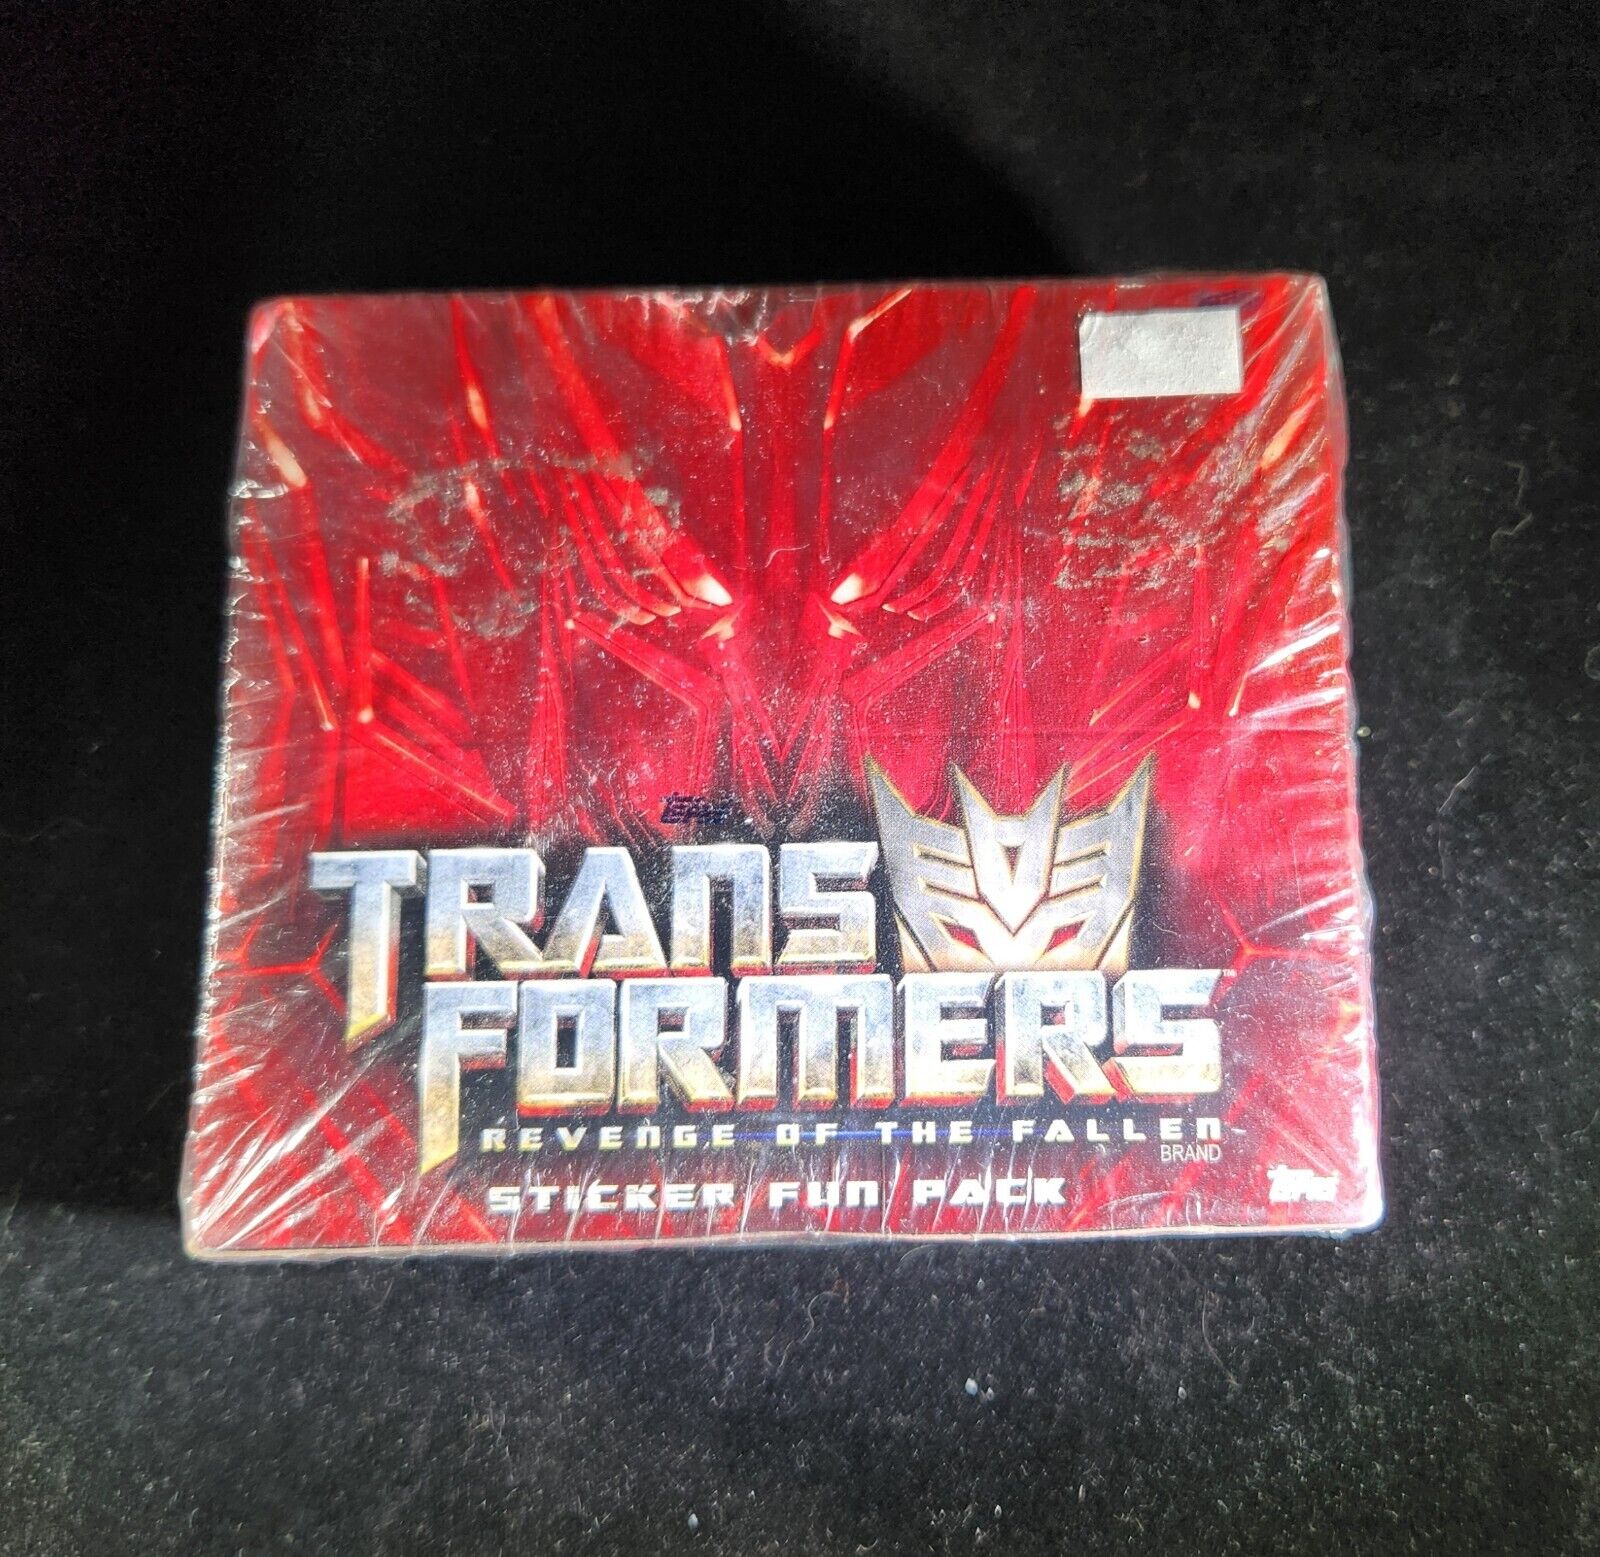 Transformers: Revenge of the Fallen - Sealed Box - Possible Autograph - Topps